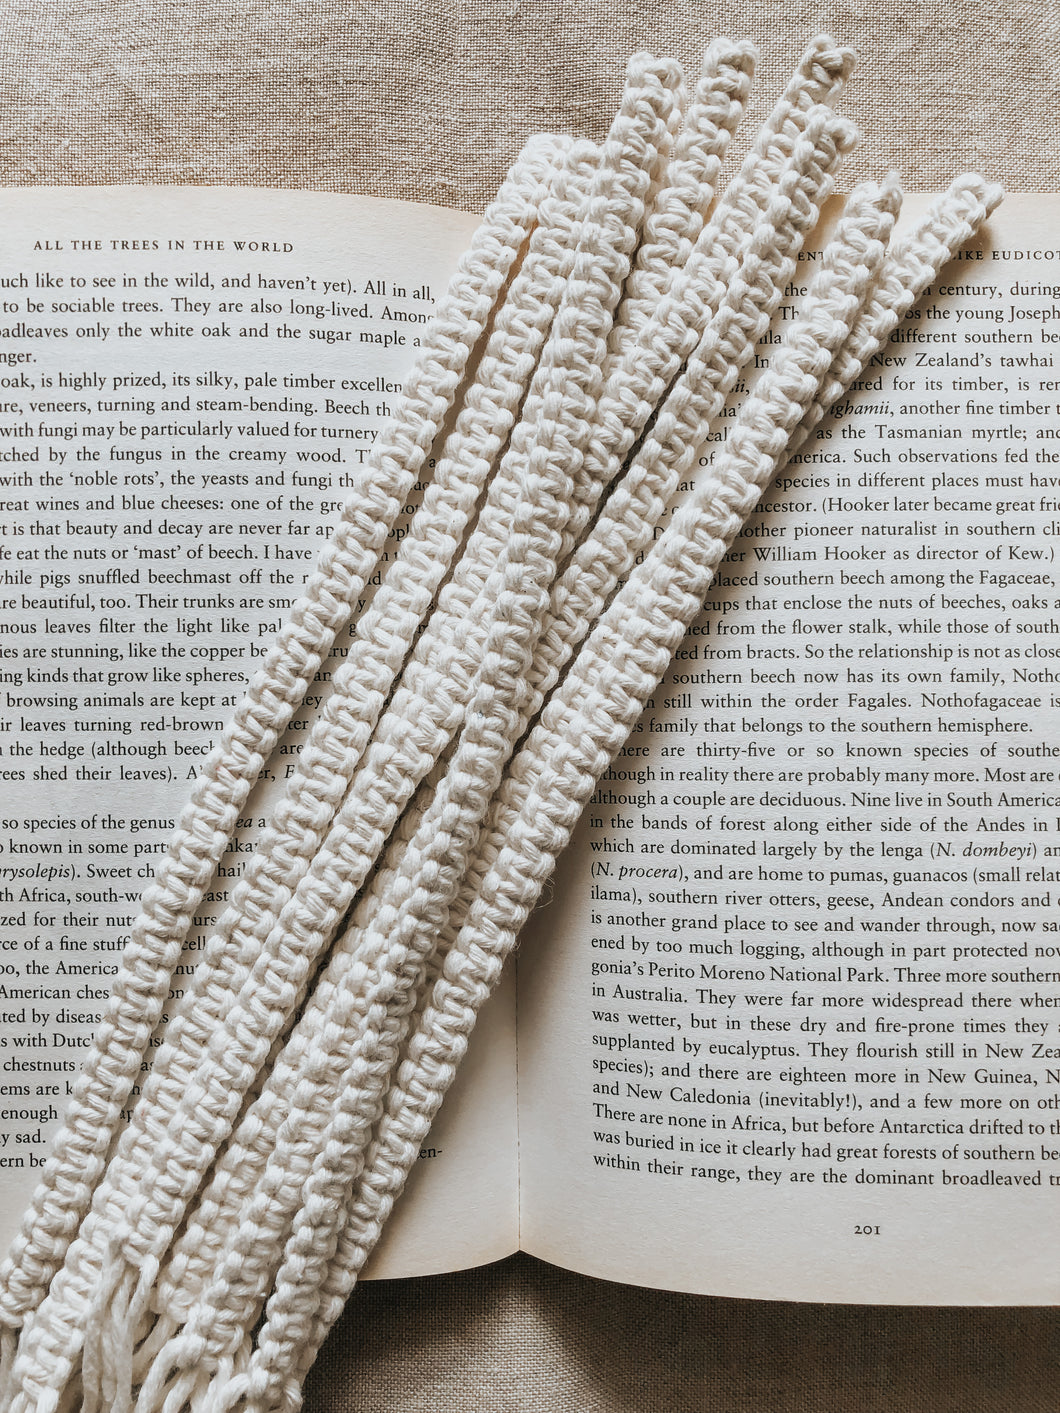 These macrame bookmarks add such a nice touch to the books that you like to read. Simple and elegant design.